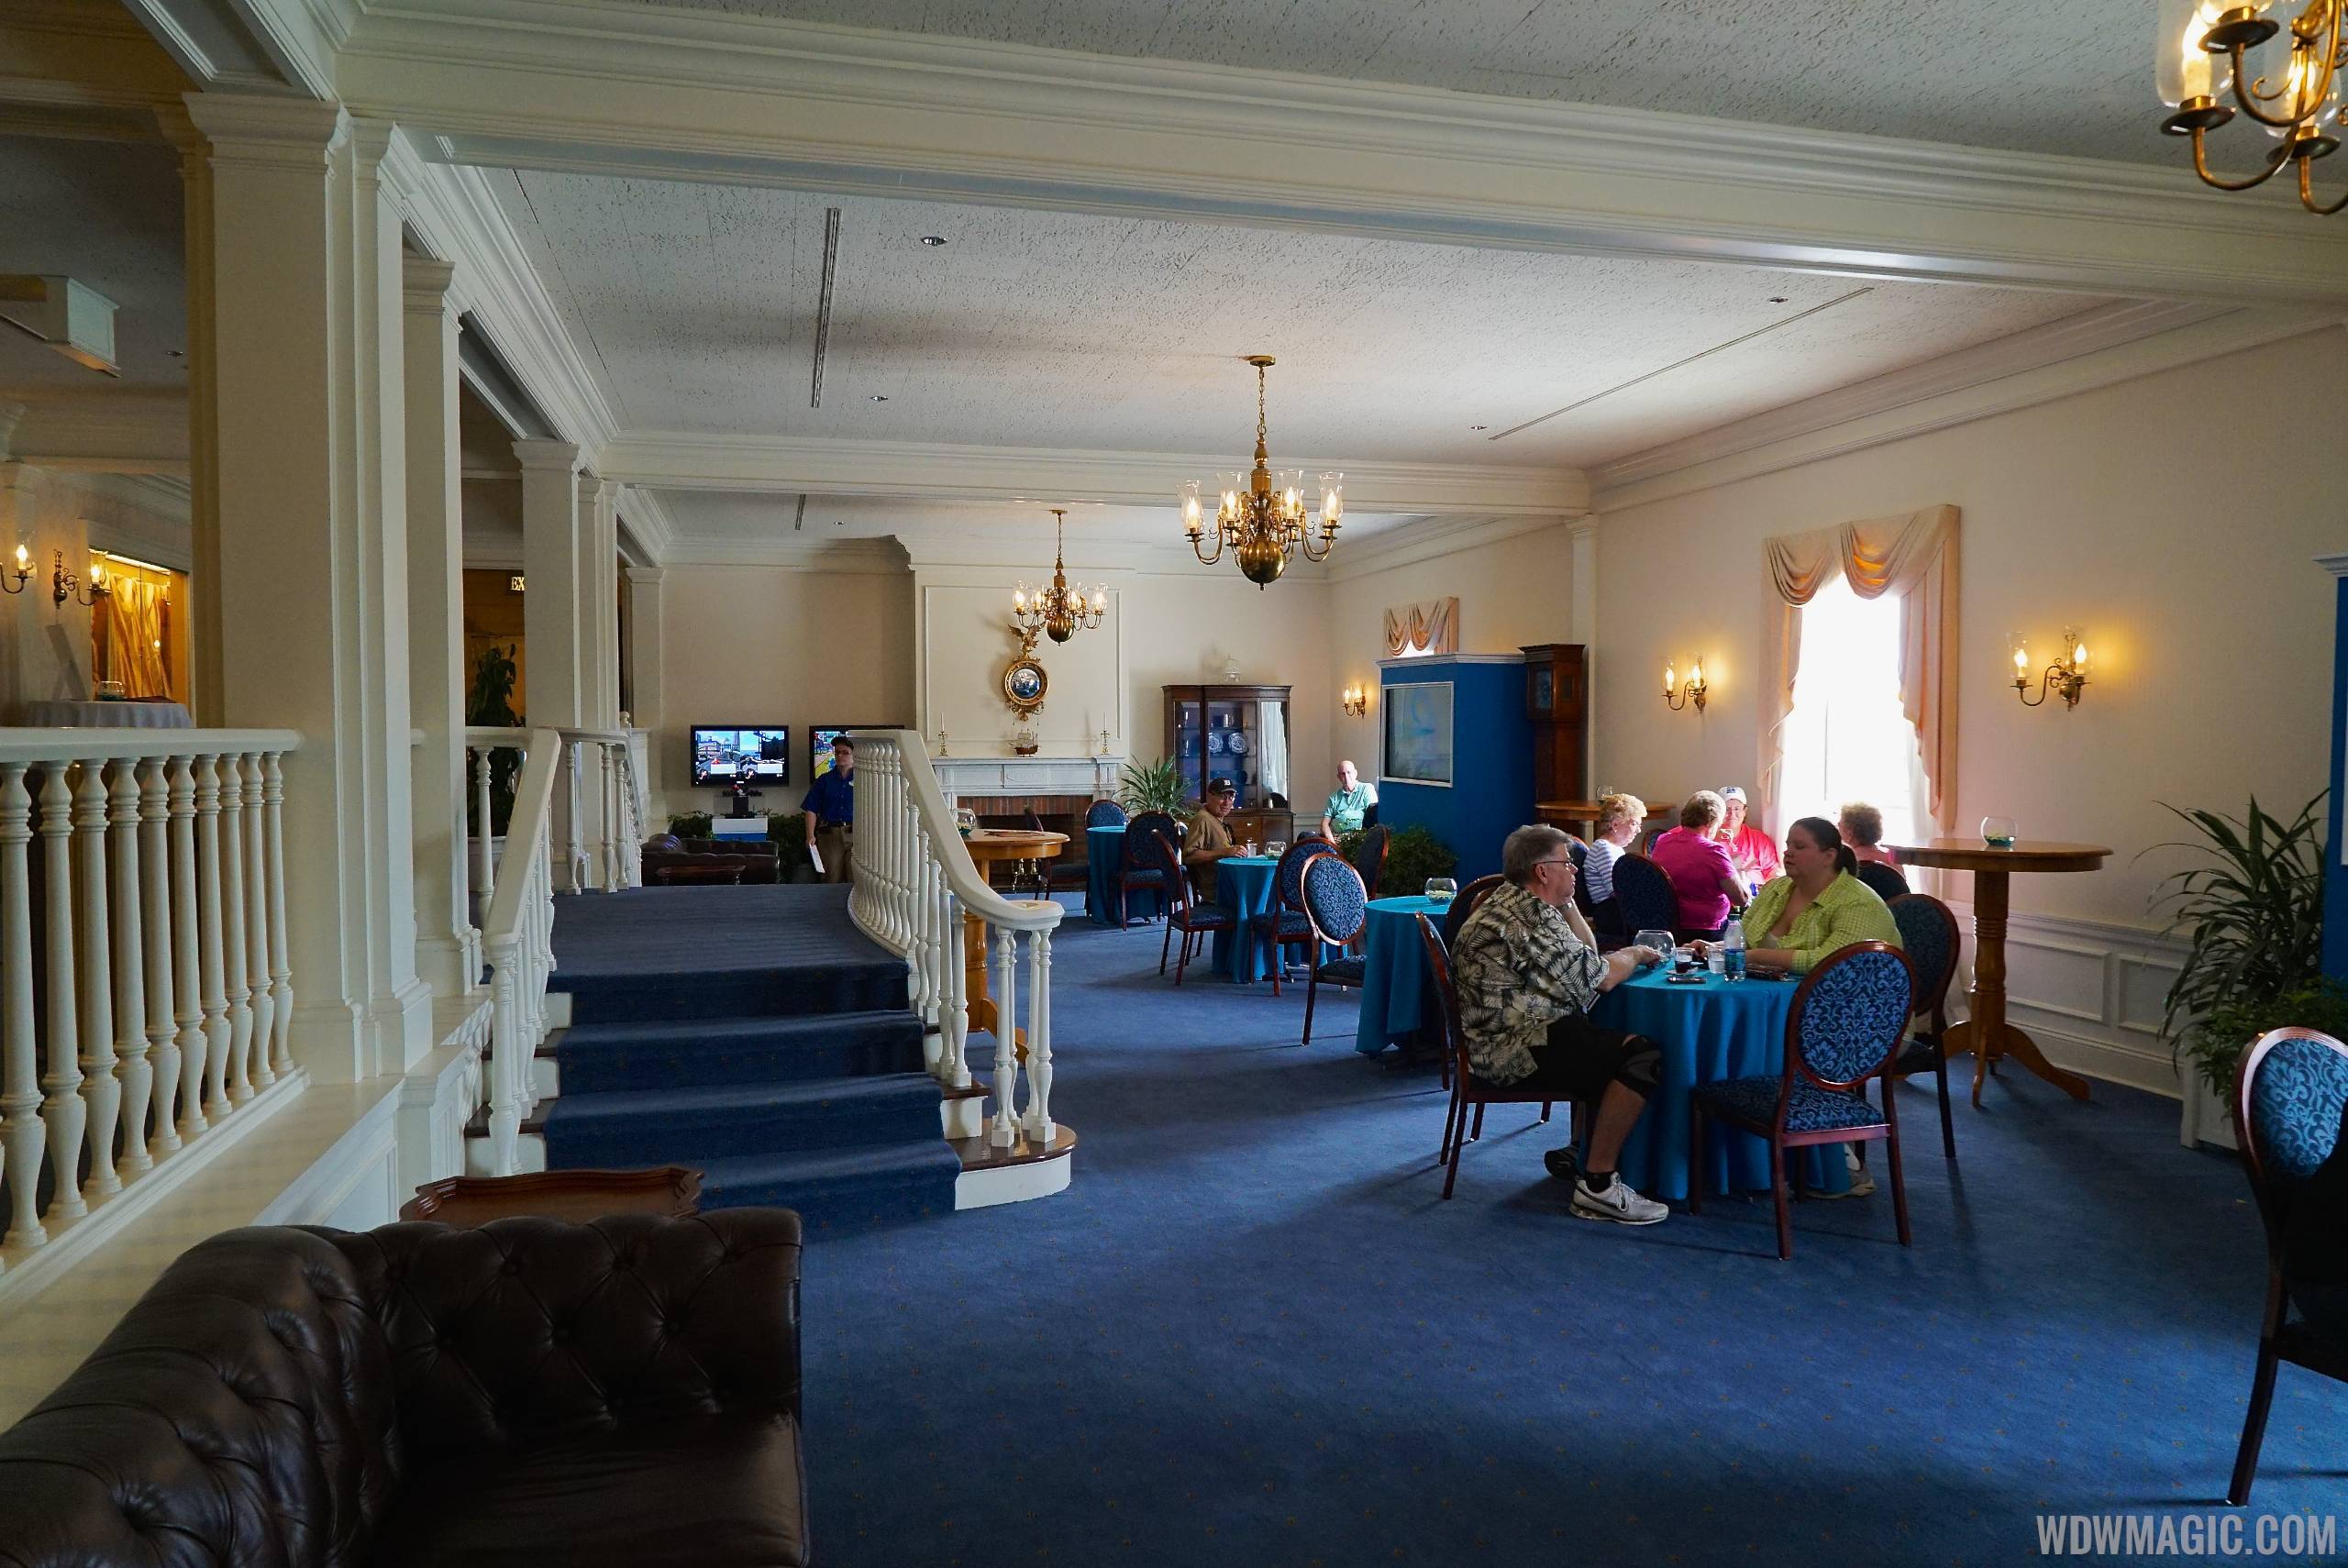 Inside the Chase Lounge at the American Adventure